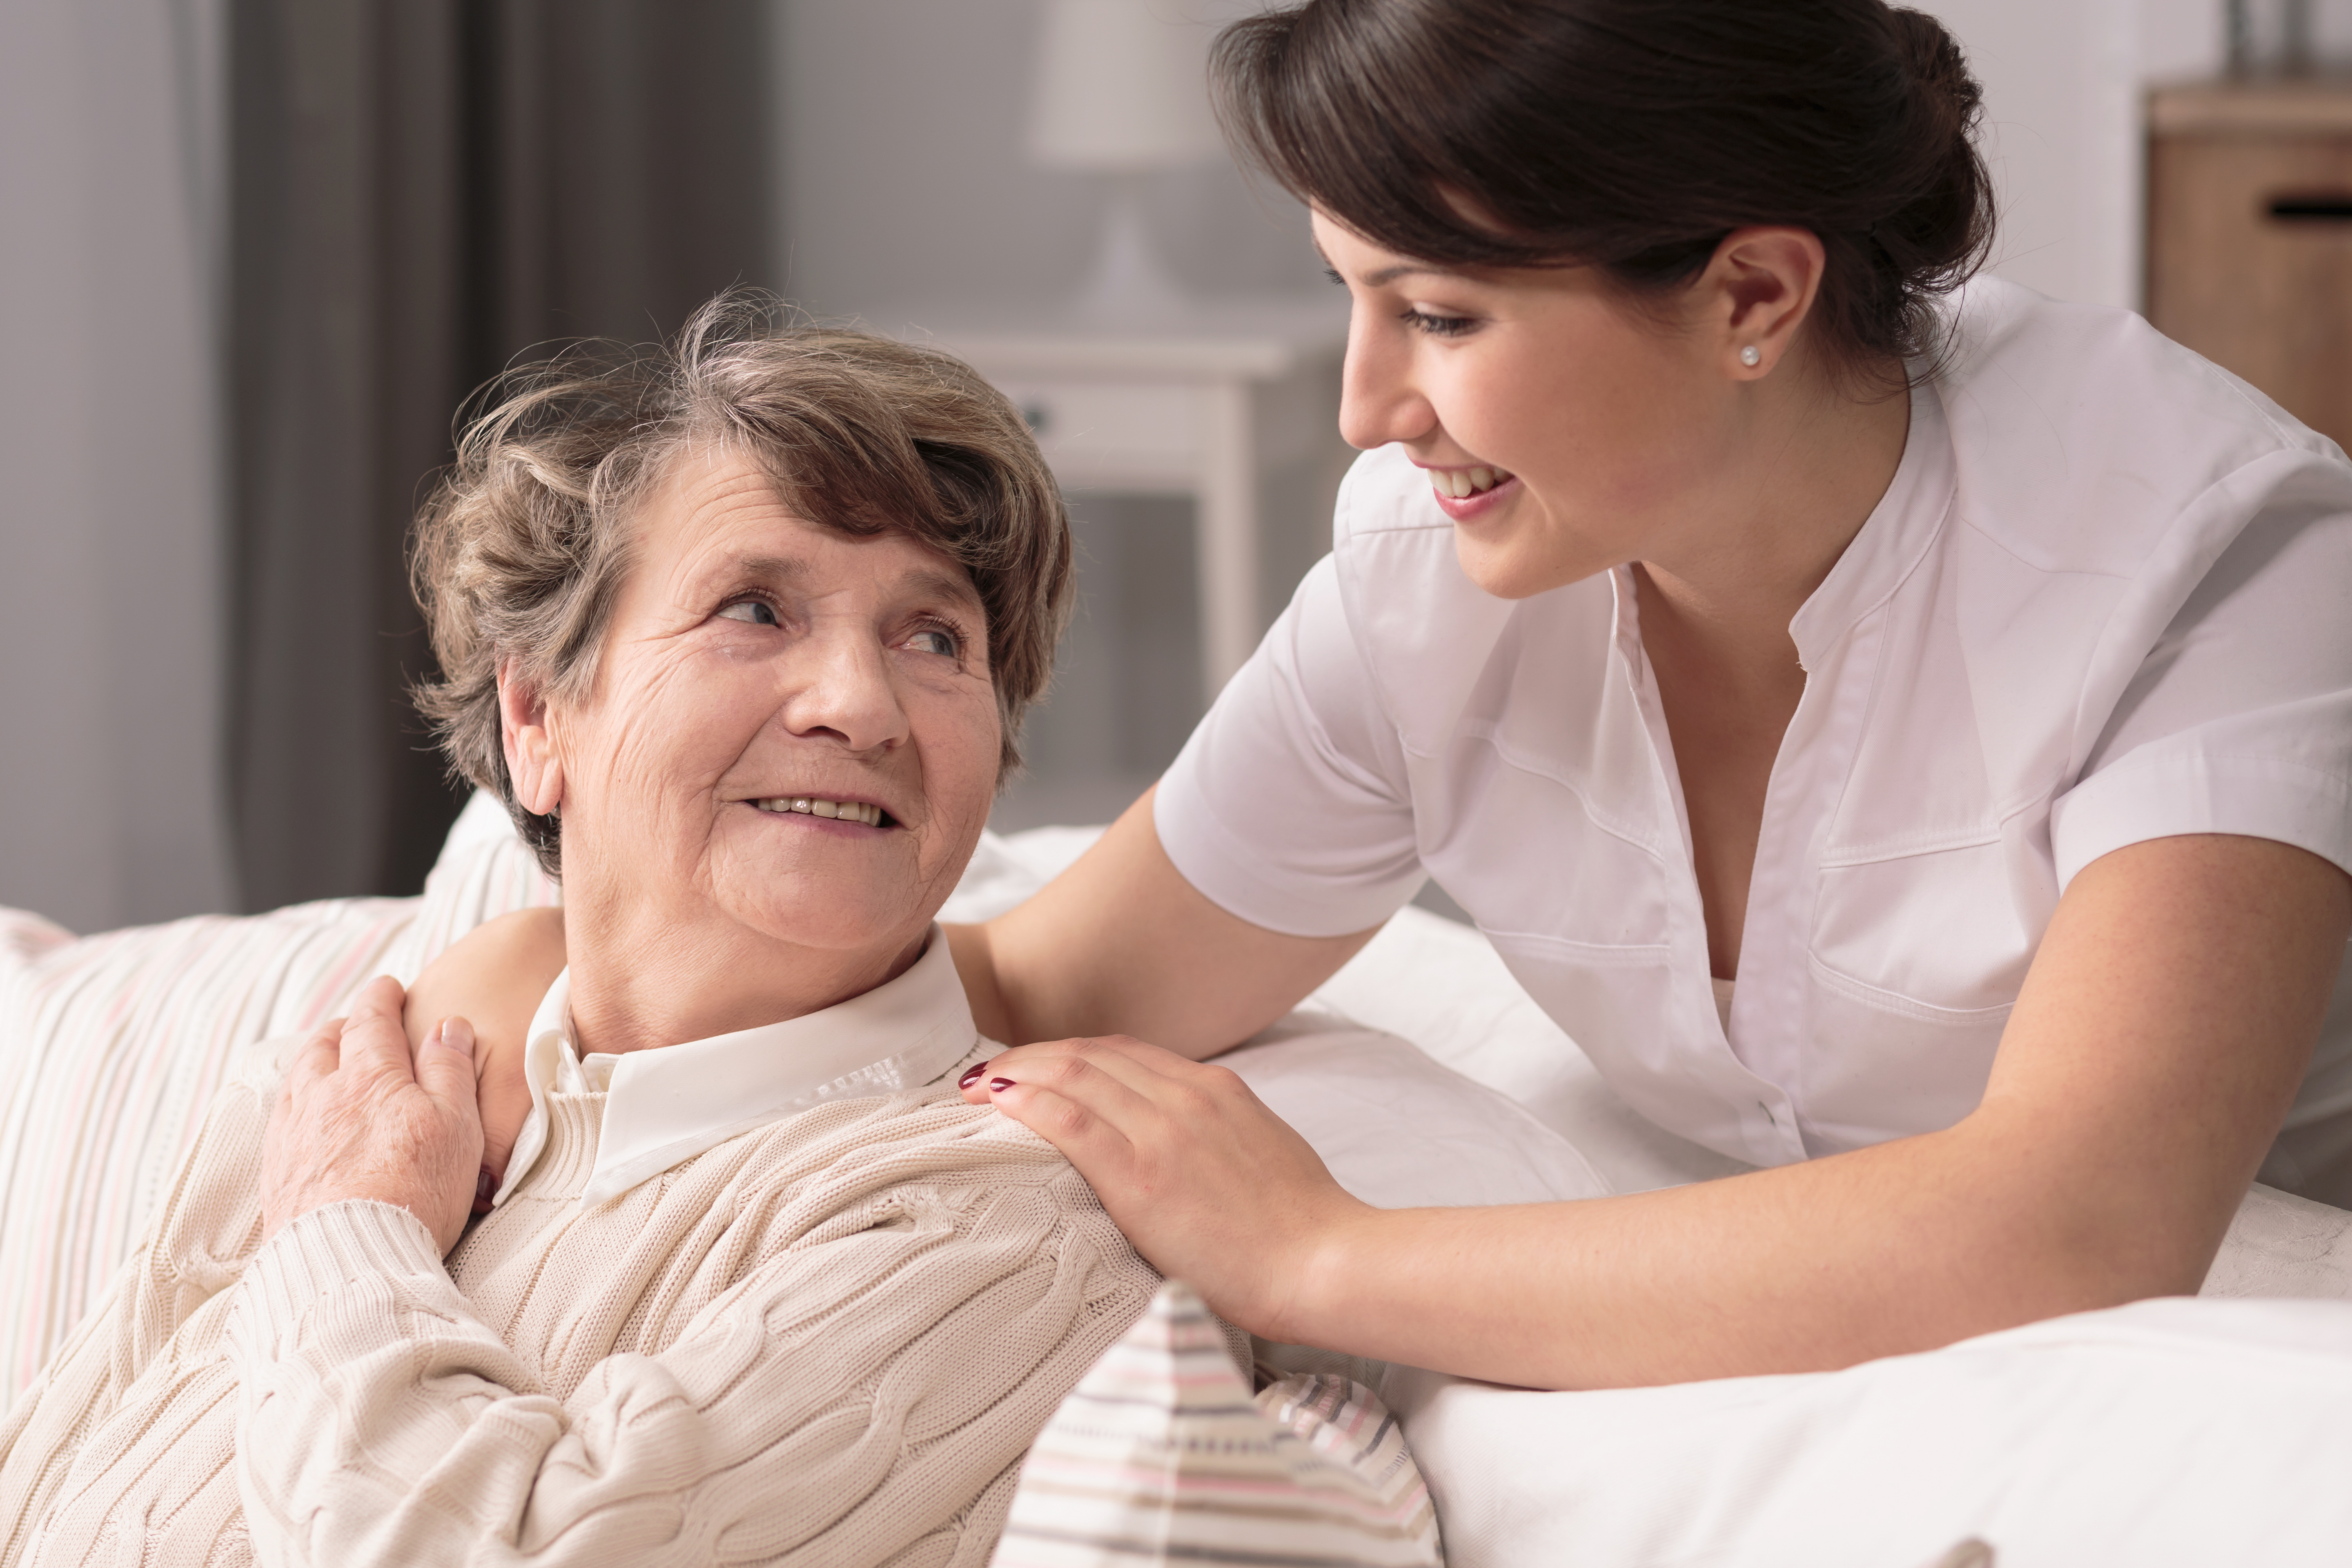 Caregiver with hands on the shoulder of senior woman